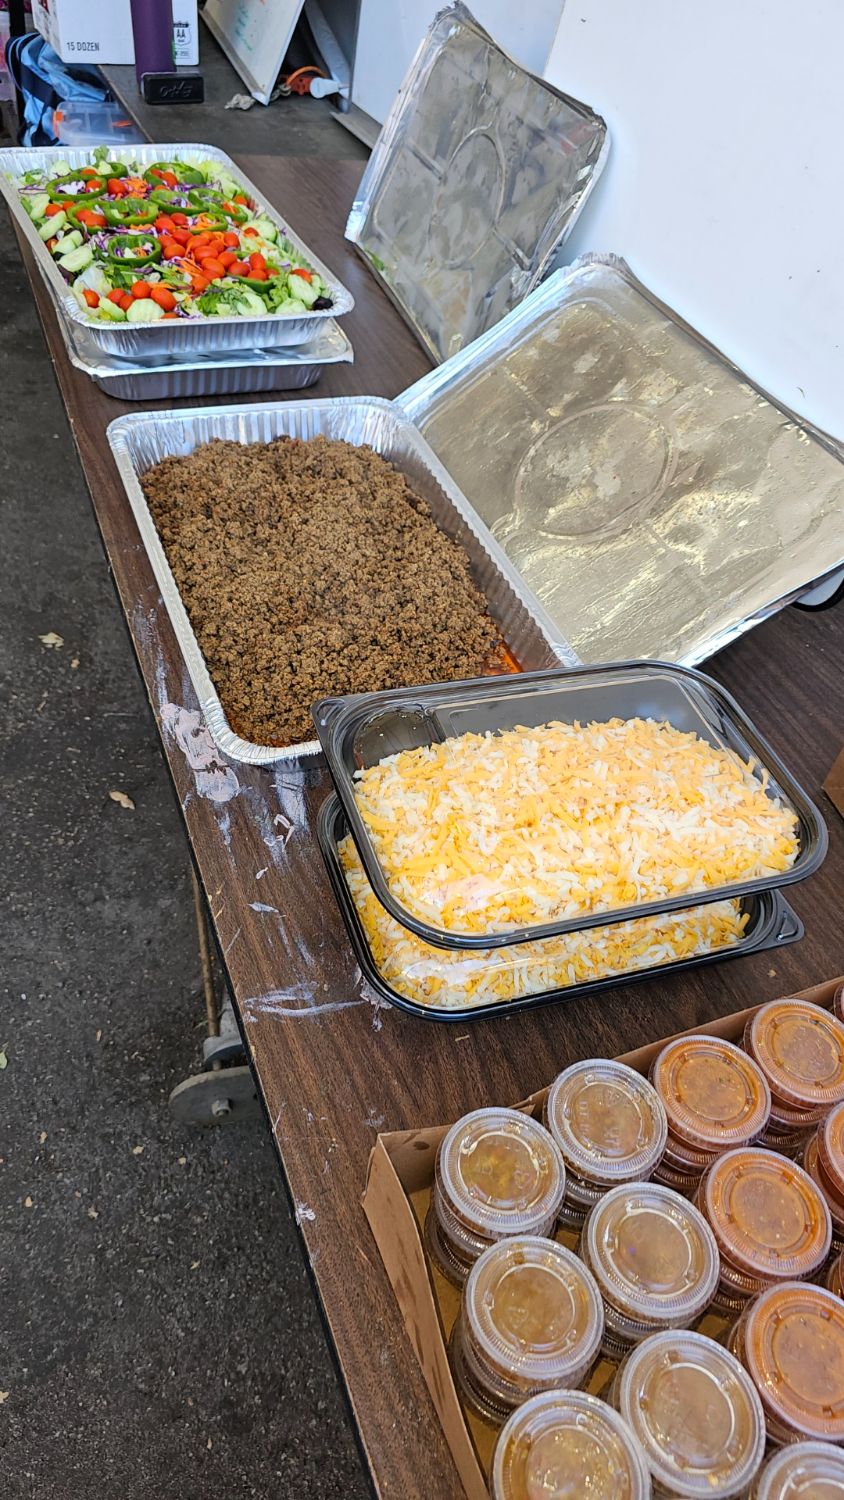 PHOTO: Steve Fillingham | The South Pasadenan | Buffet lunch from Hi-Life Burgers consisting of taco salad awaits hungry volunteers at the War Memorial Building float site.